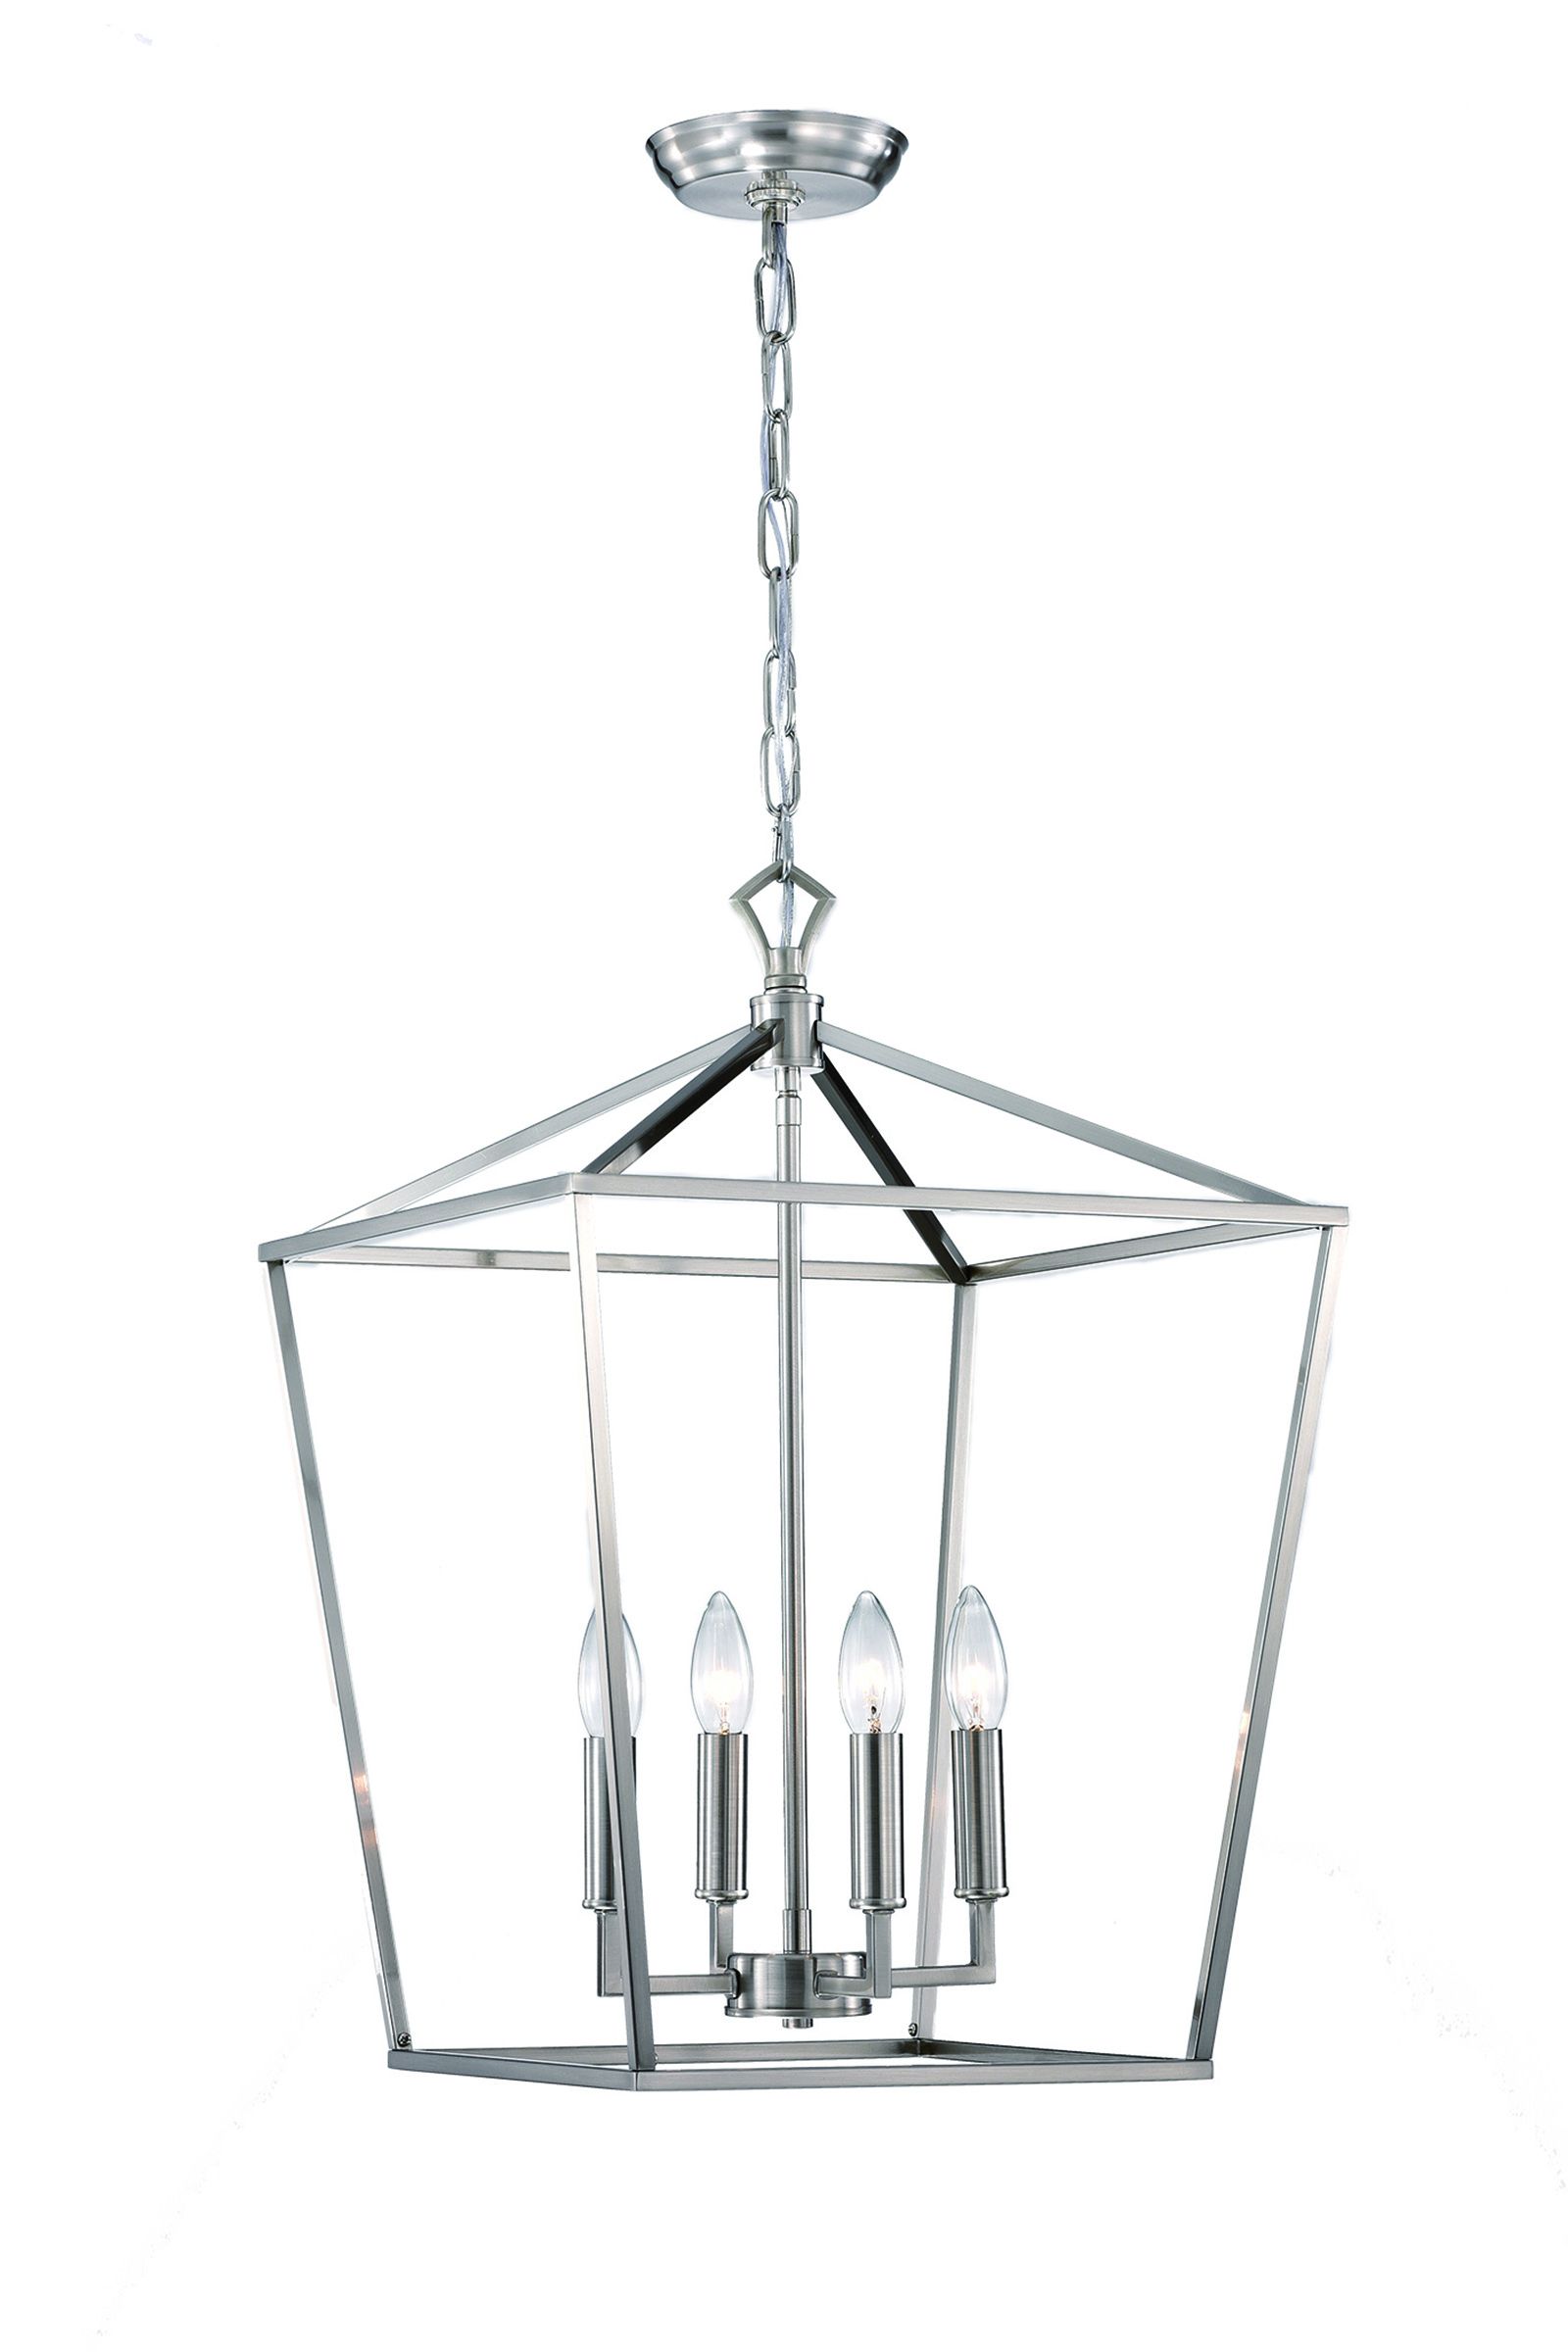 Polished Nickel Lantern Chandeliers Throughout Recent 4 Light Brushed Nickel Lantern Pendant Chandelier 16 In – Edvivi Lighting (View 7 of 15)